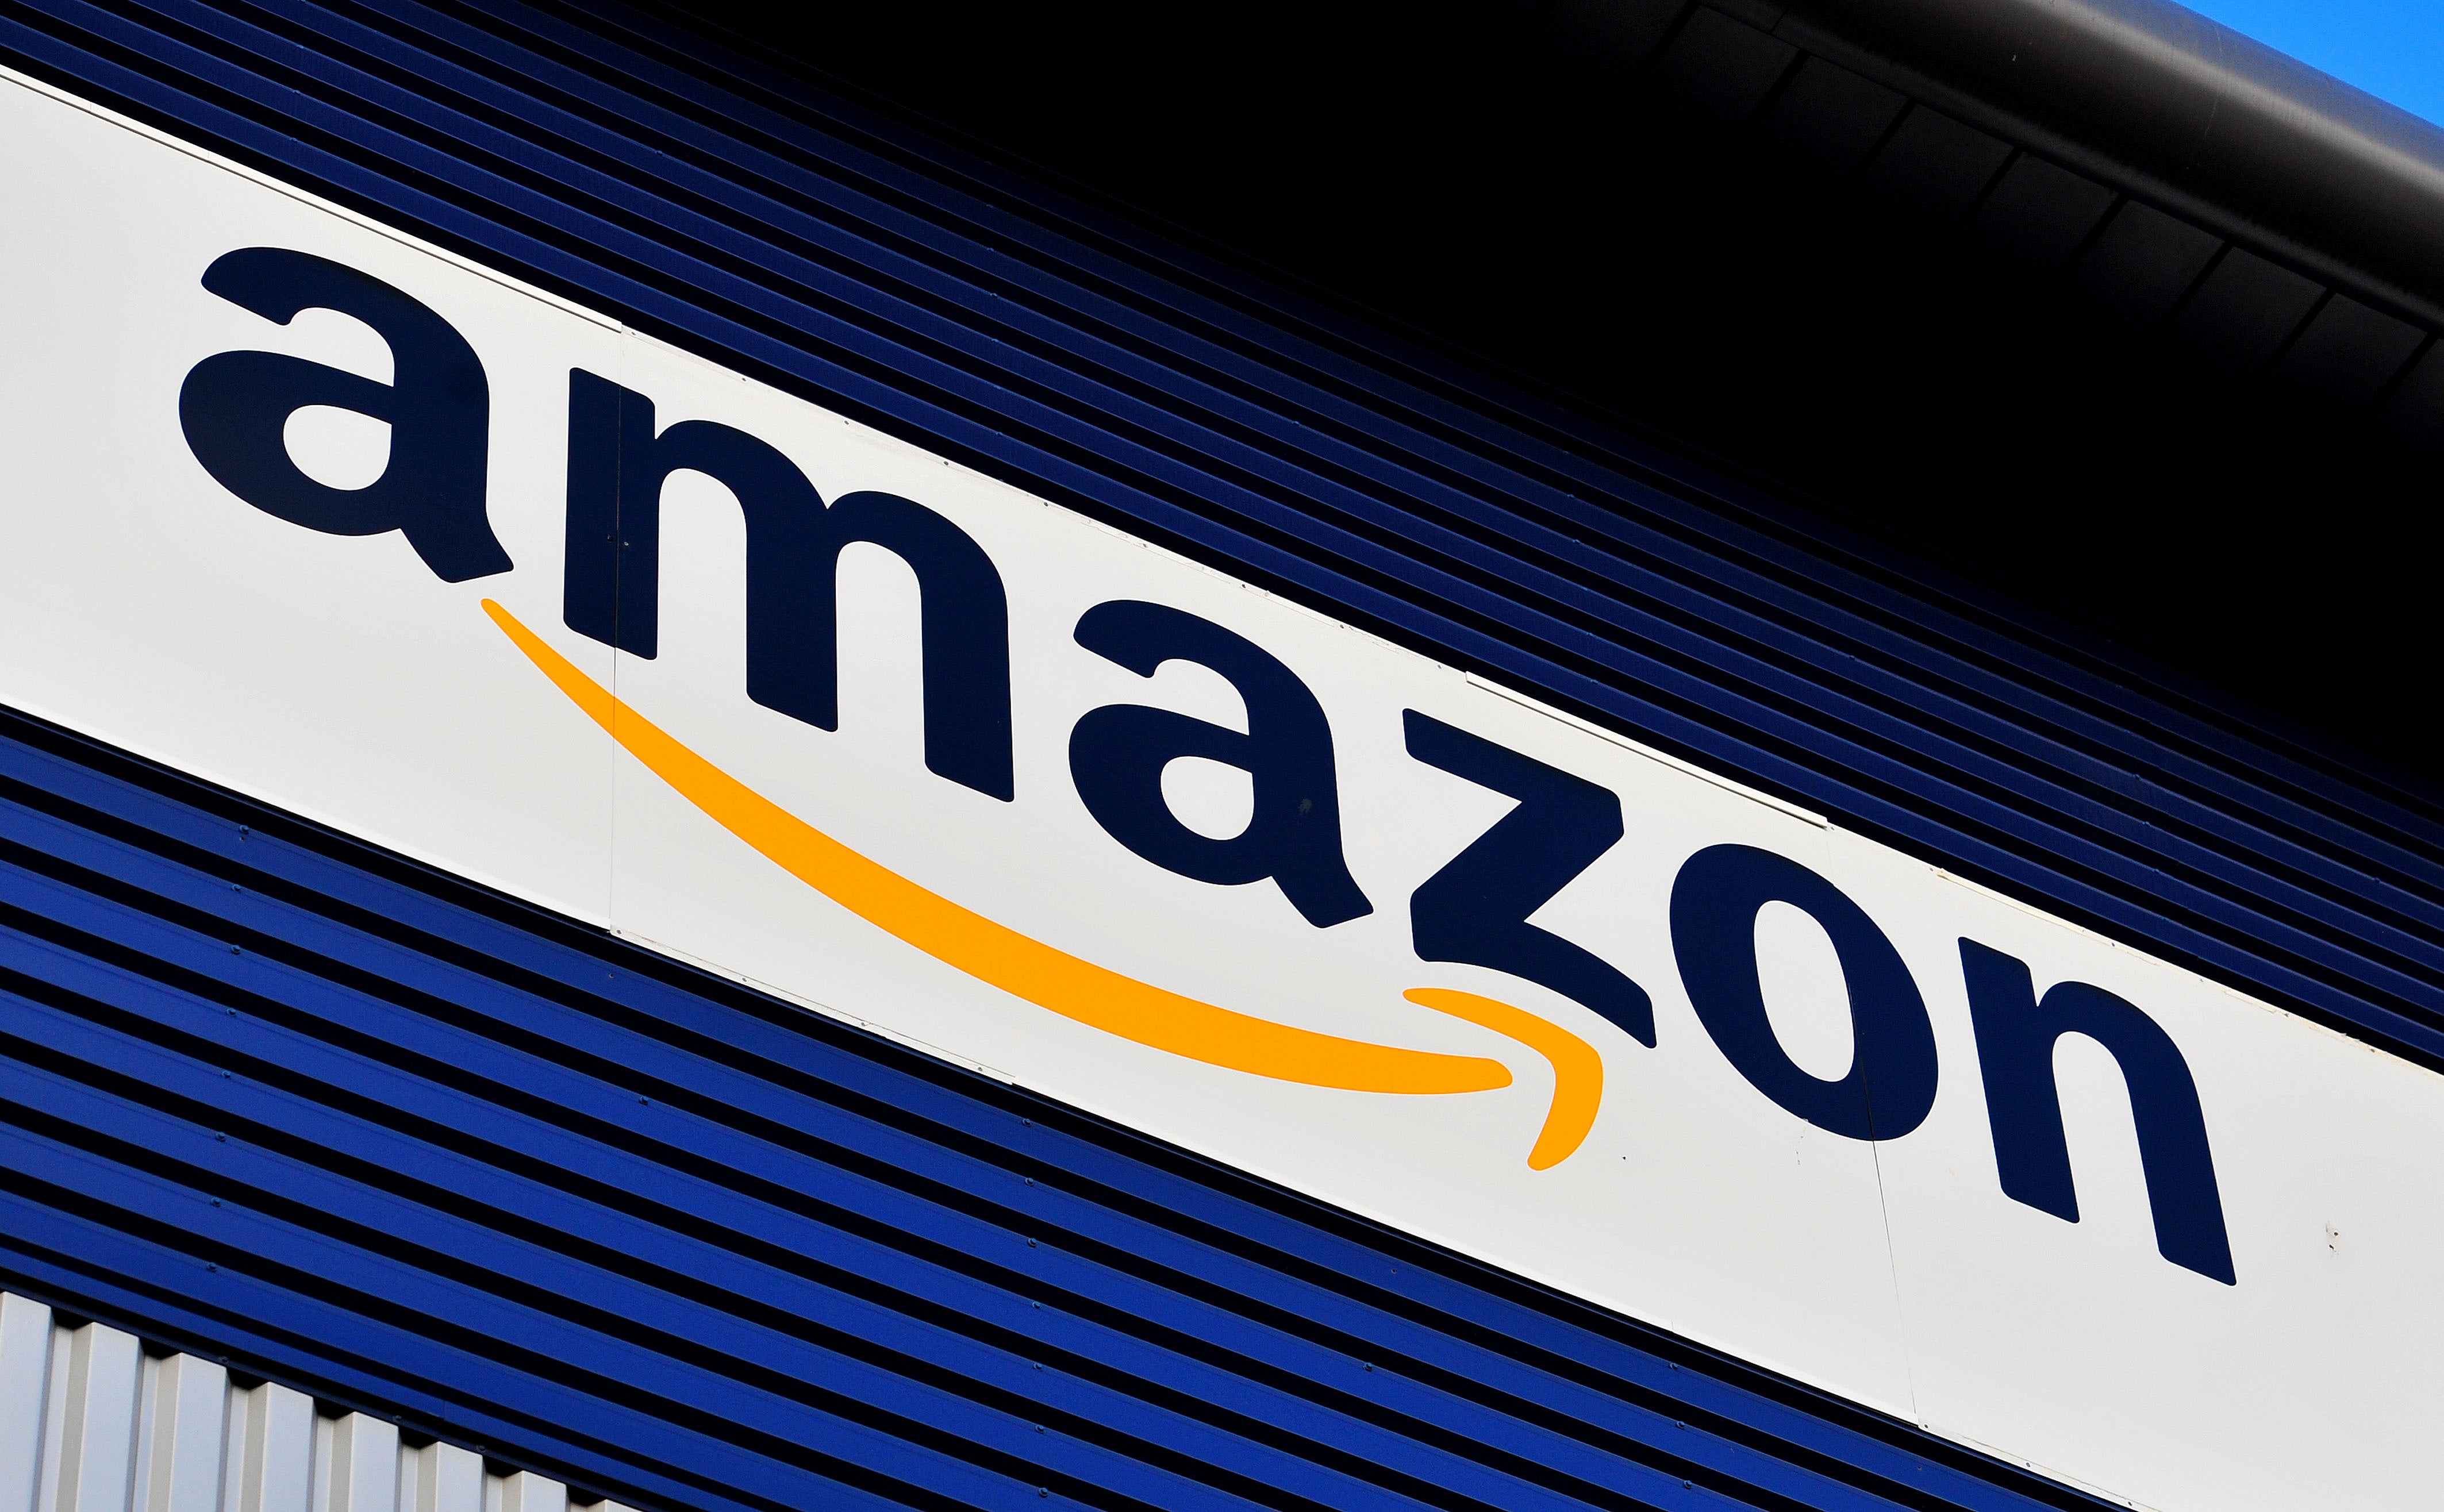 Online retail titan Amazon is offering new warehouse recruits a £1,000 joining bonus as it looks to attracts staff amid a mounting hiring crisis.